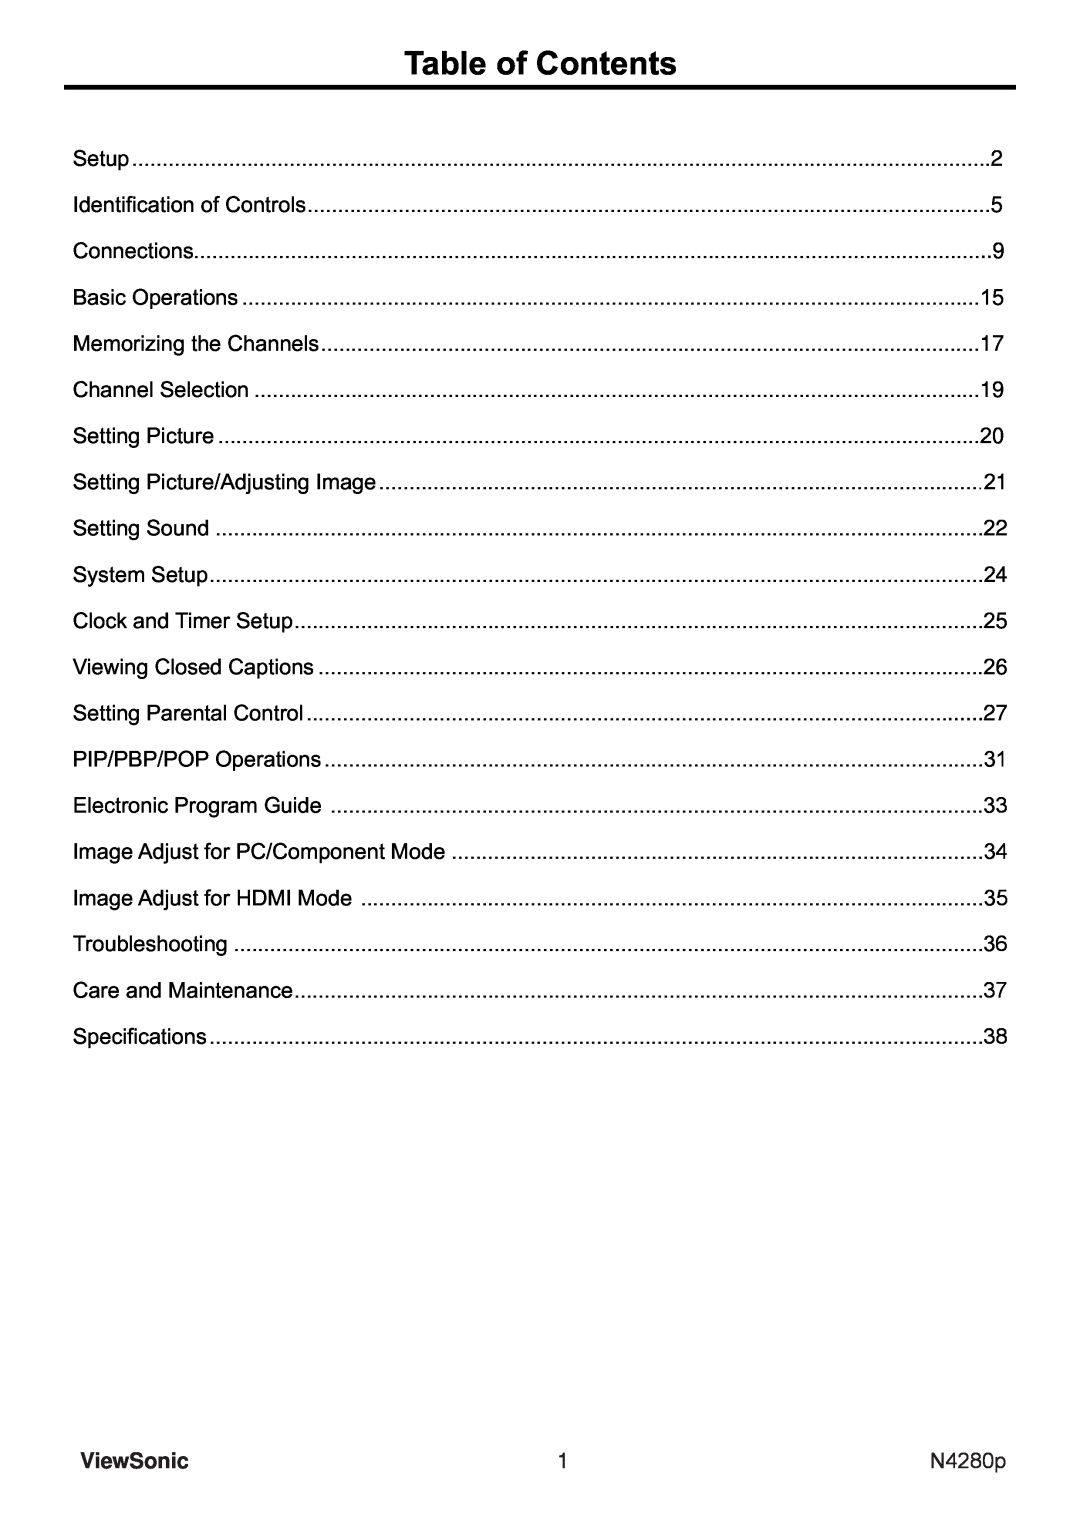 ViewSonic N4280p manual Table of Contents, ViewSonic 